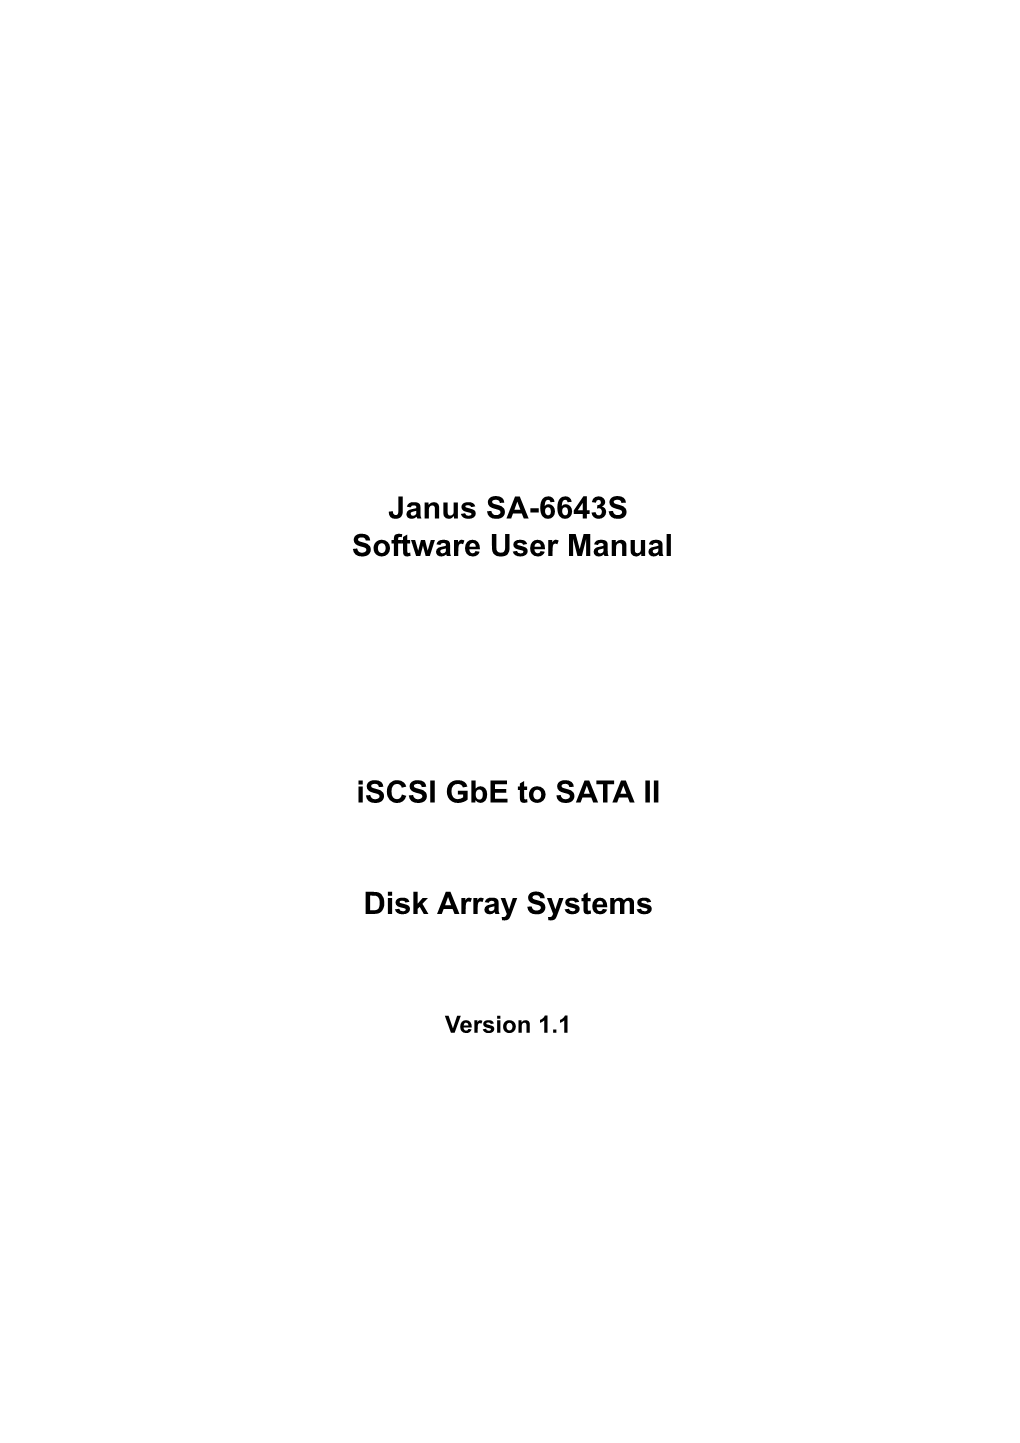 Iscsi Gbe to SATA II Disk Array Systems Janus SA-6643S Software